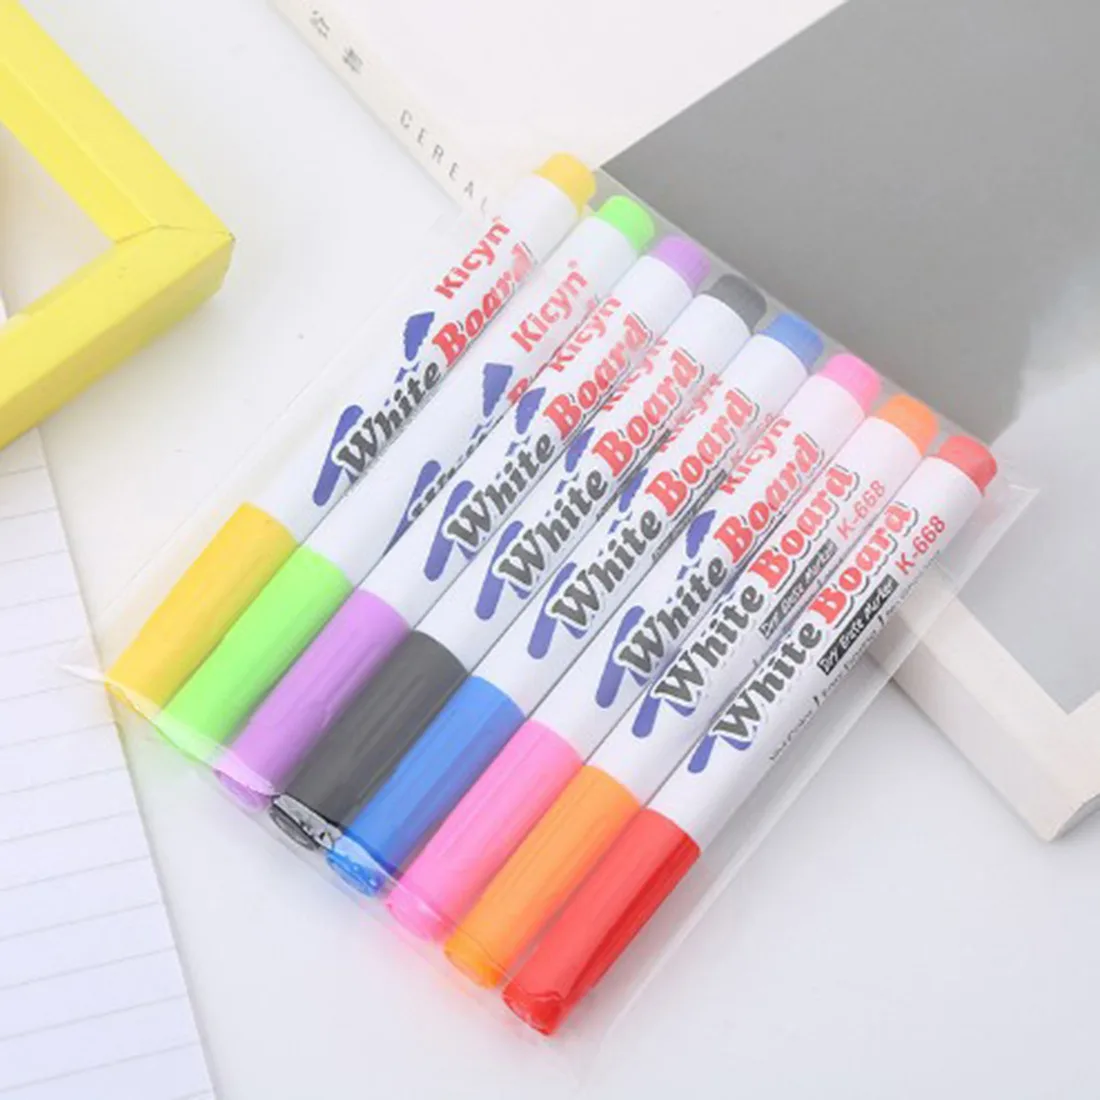 Magical Water Painting Pen Colorful Mark Pen Markers Floating Ink Pen Doodle Water Pens Children Montessori Early Education Toys